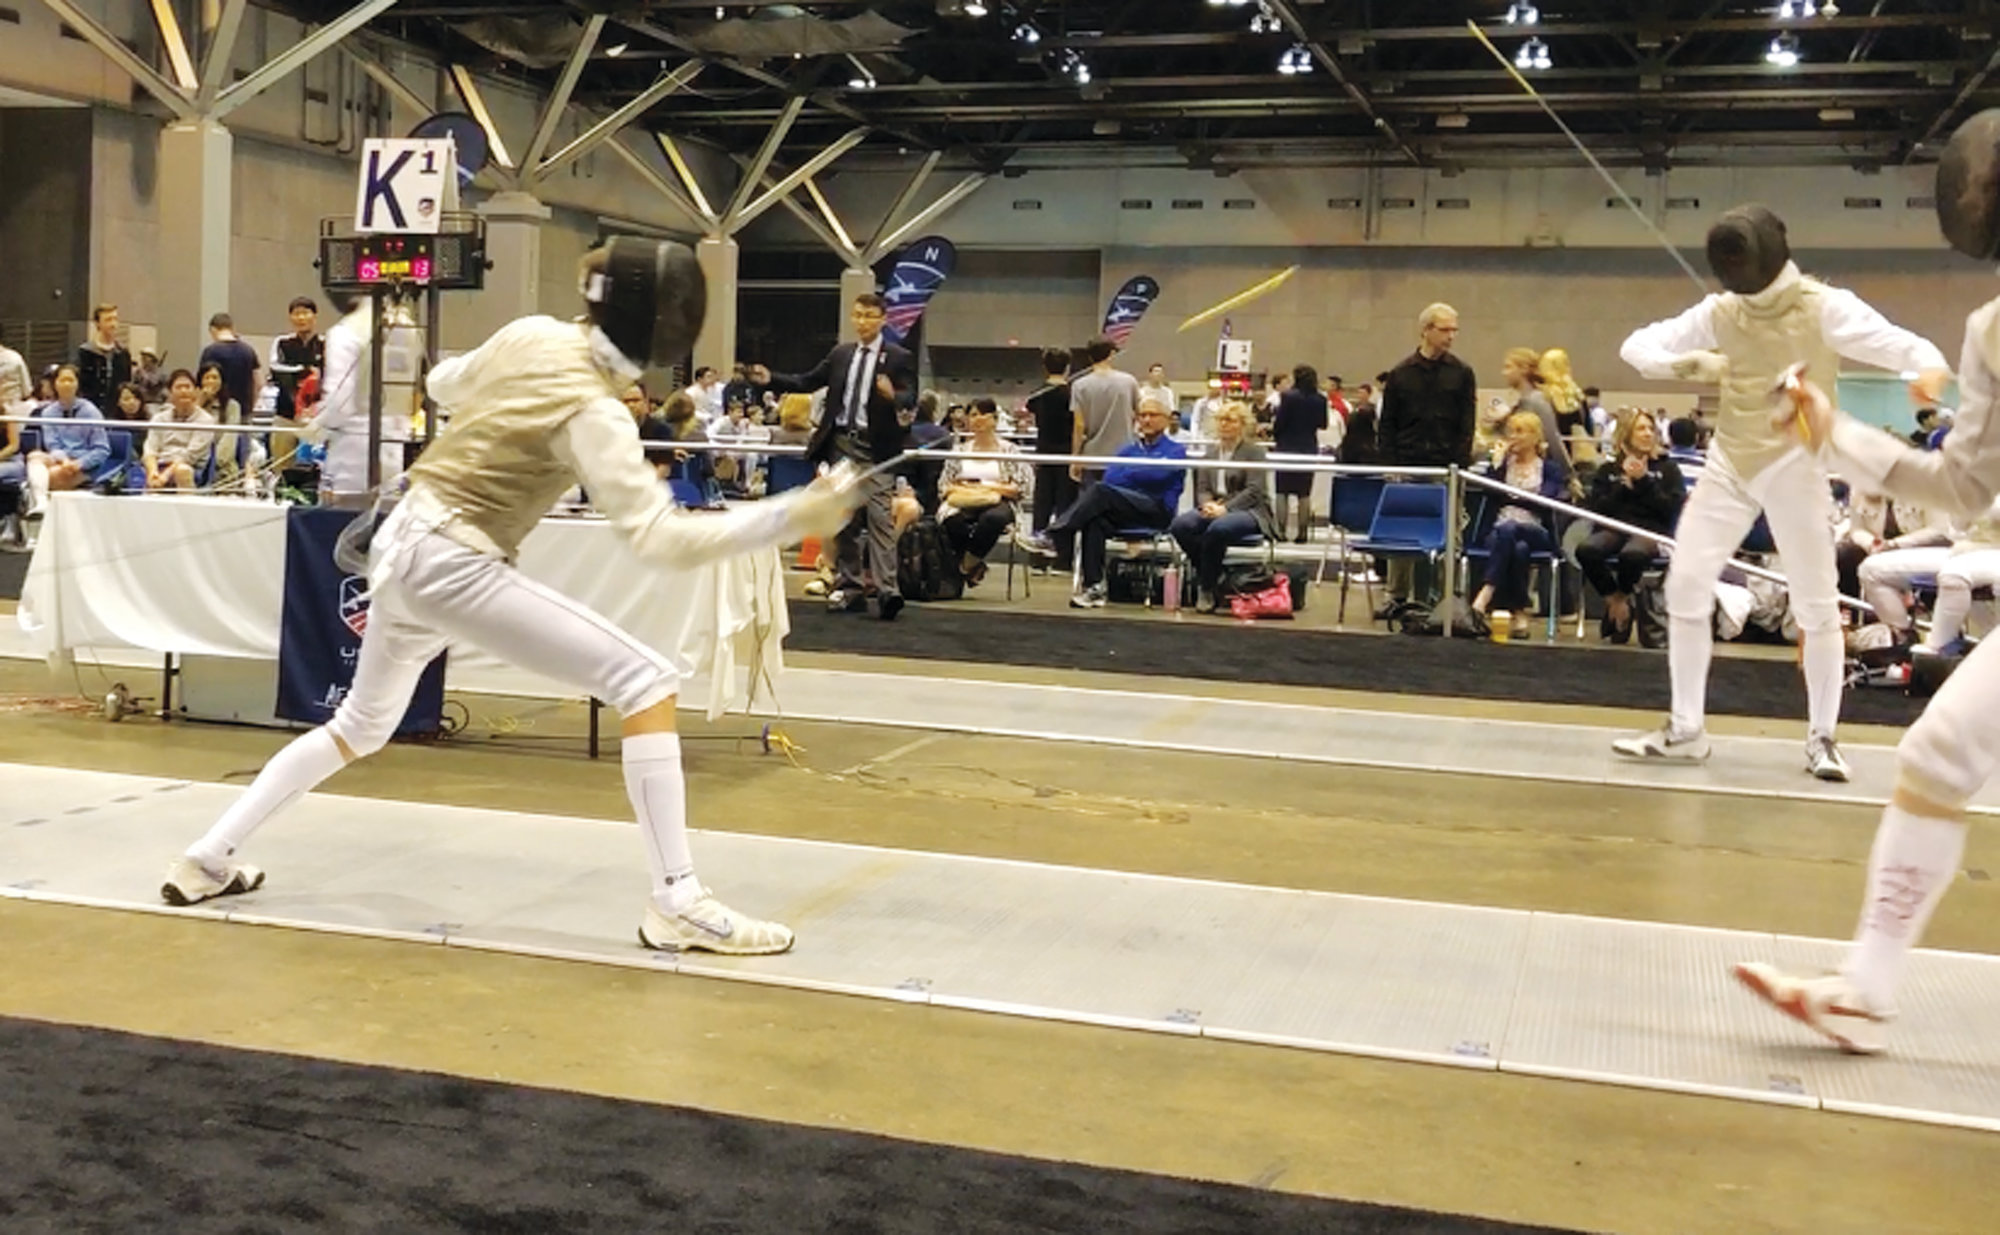 Wilson Hall senior Luke Kinney, left, competes last year at the 2018 USA Fencing National Championships in St. Louis, Missouri.